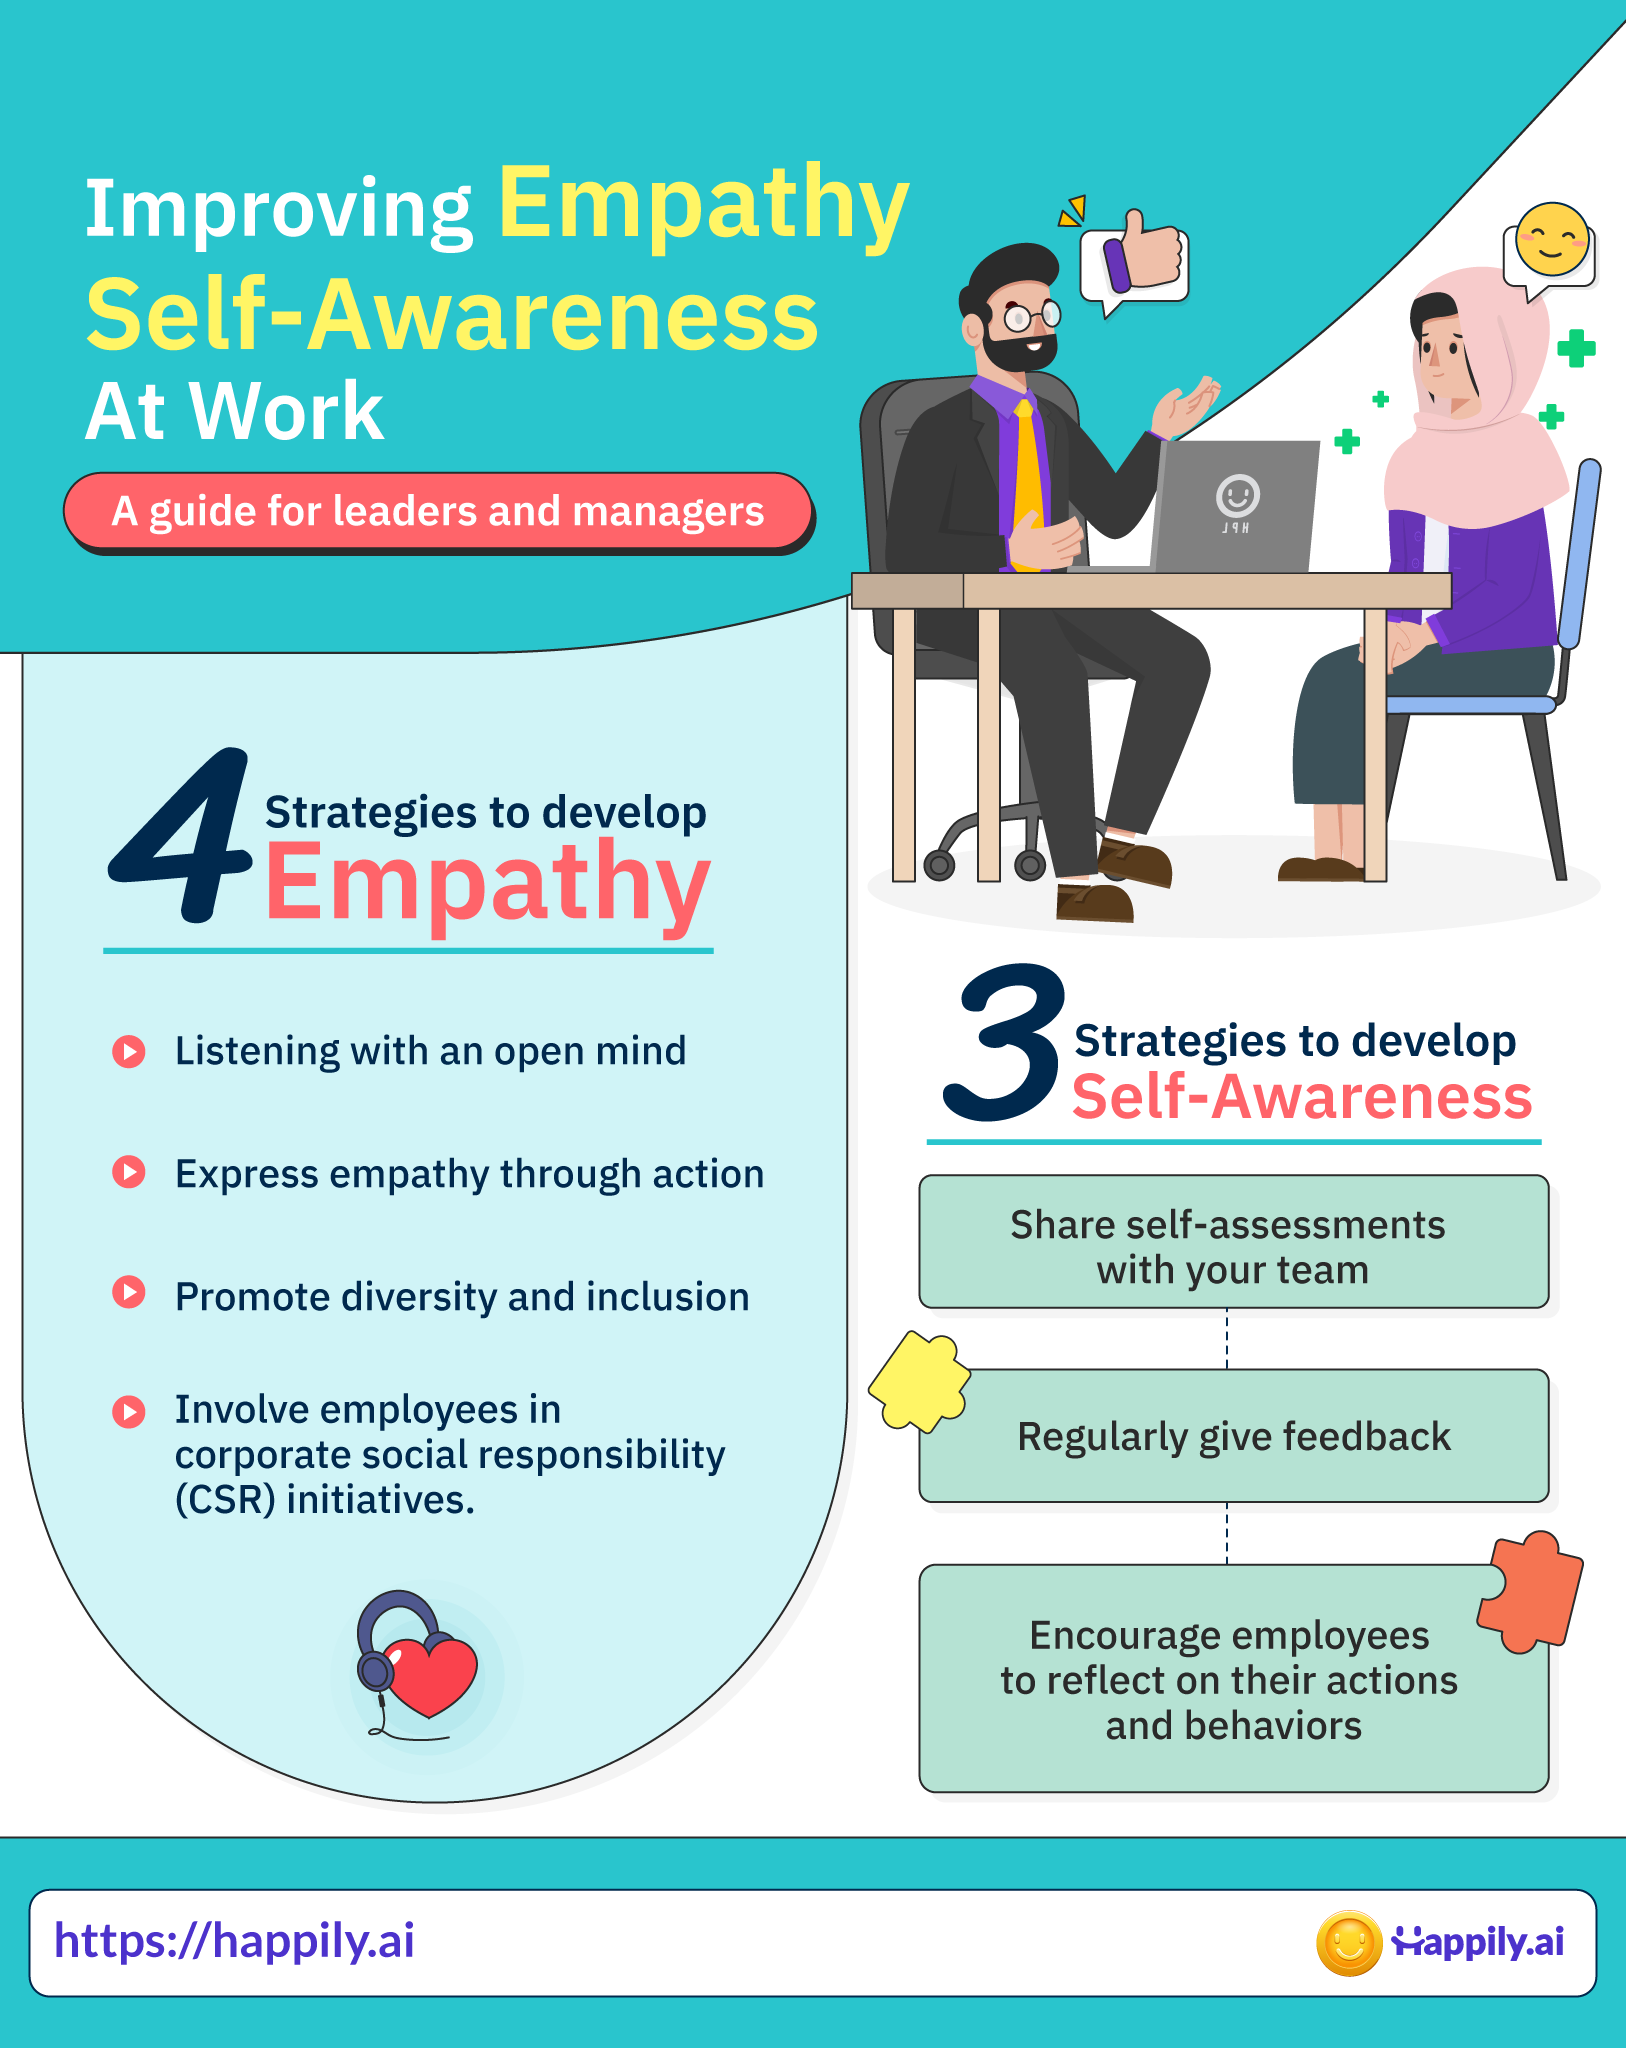 How to improve empathy and self-awareness at work